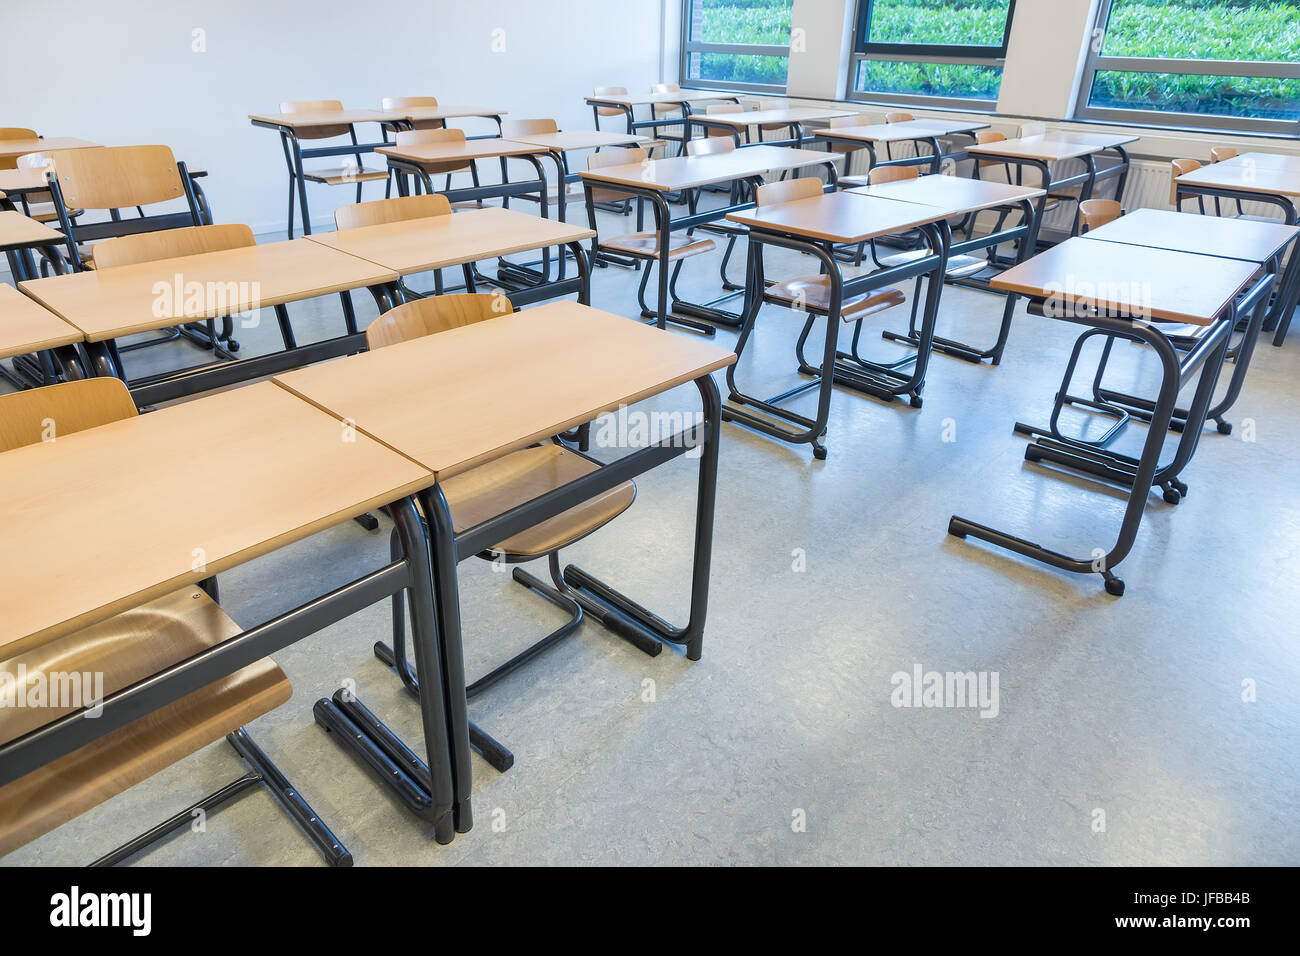 Rows of tables and chairs in classroom Stock Photo